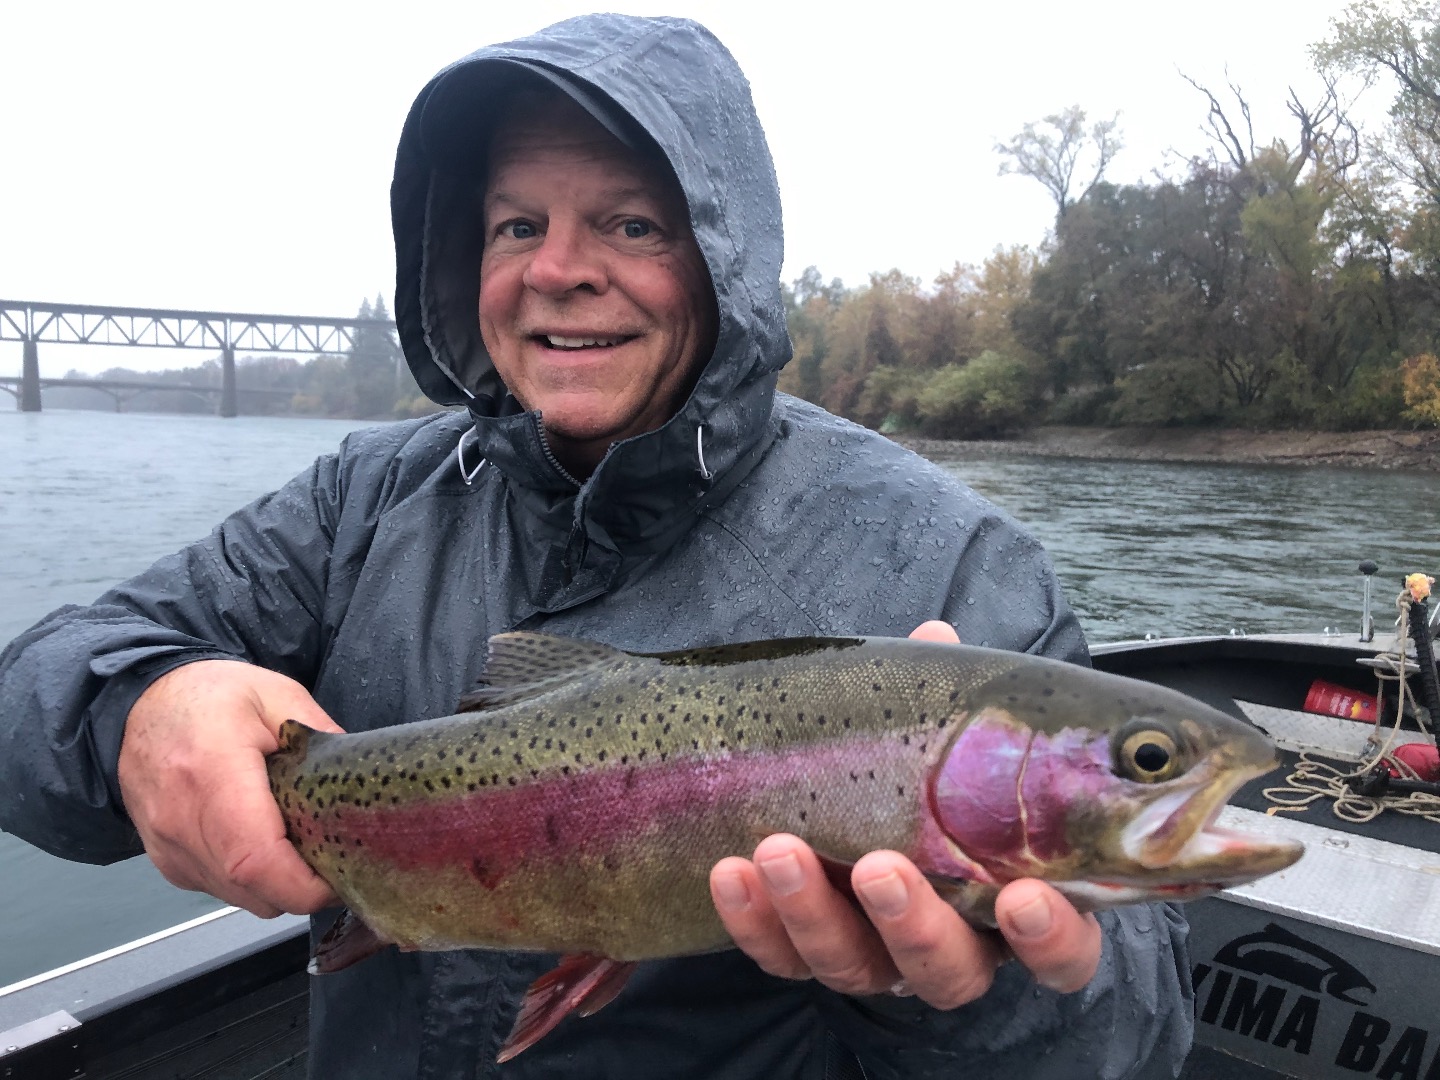 Successful steelhead/trout action on the Sac!